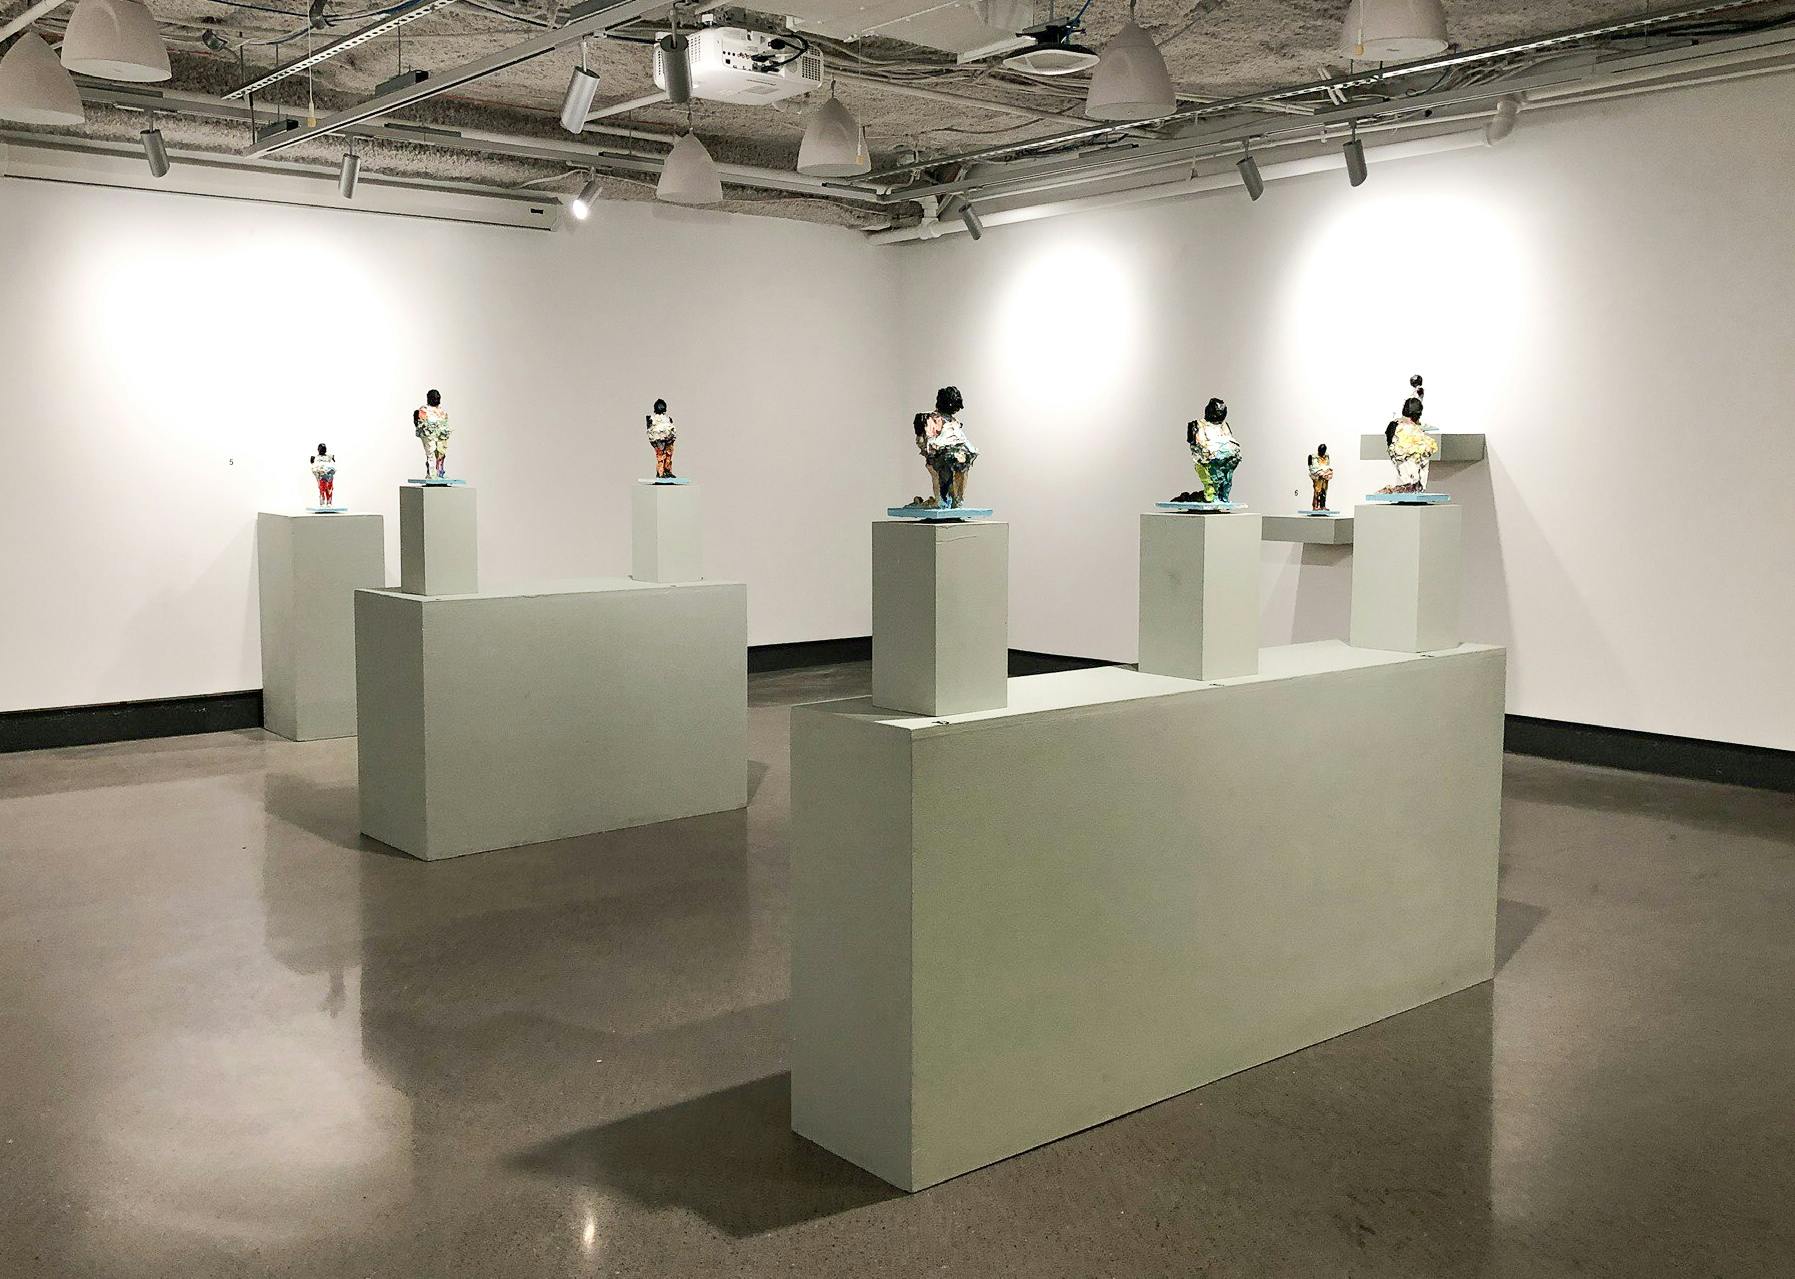 Small figures appear on white pedestals in Lavaughan Jenkins' exhibition.